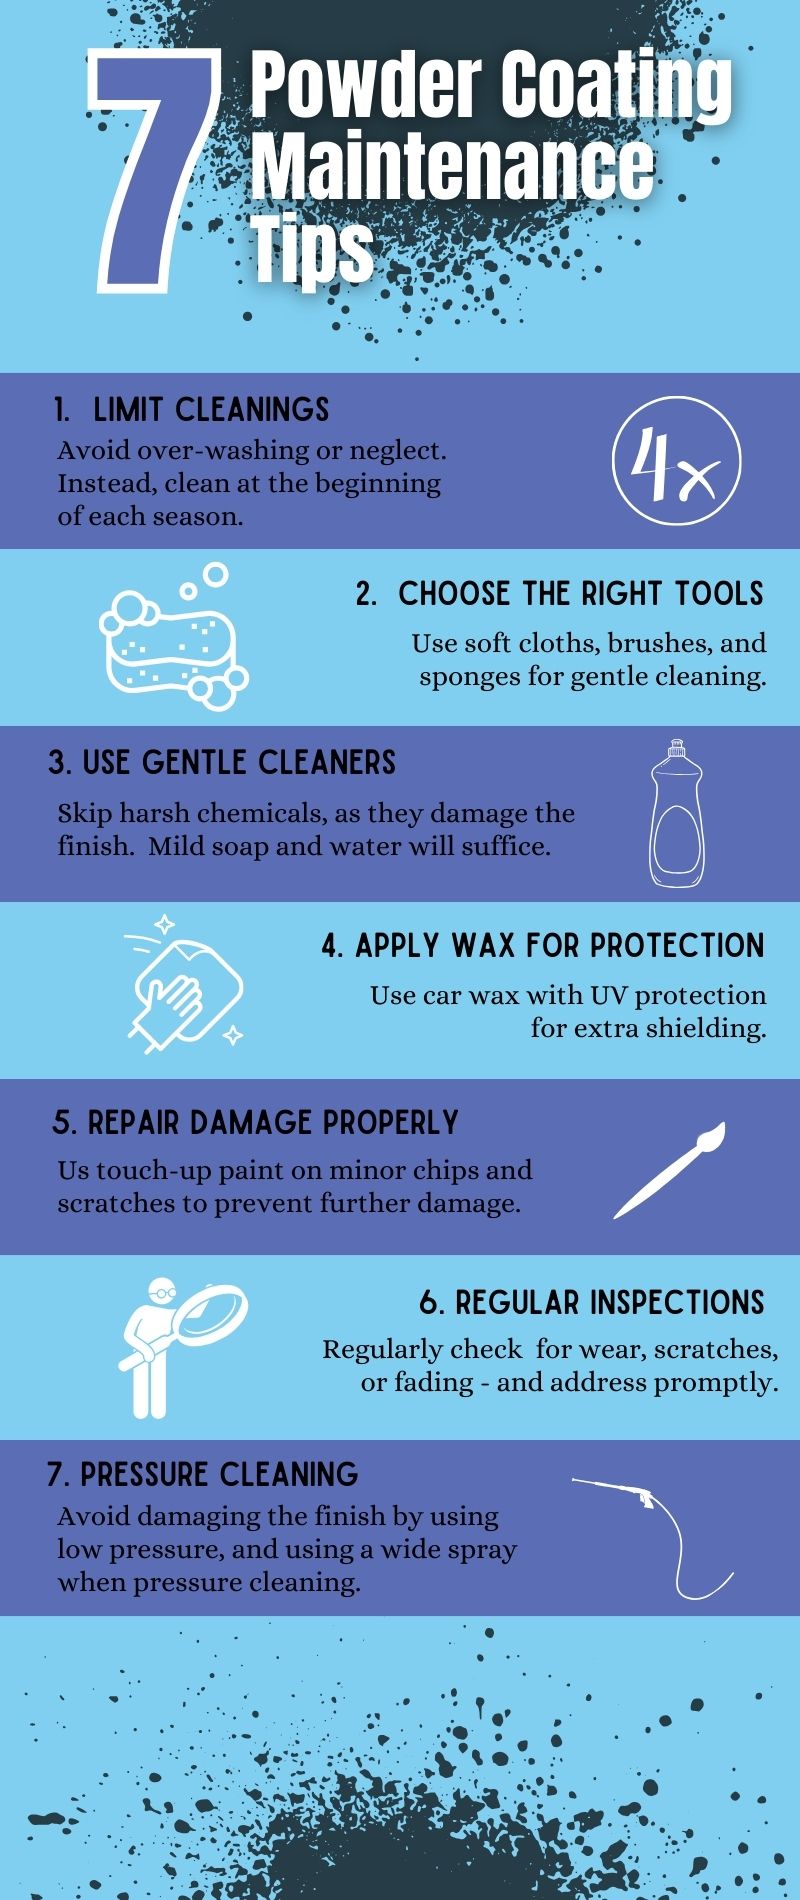 original infographic stating maintenance tips for powder coated items